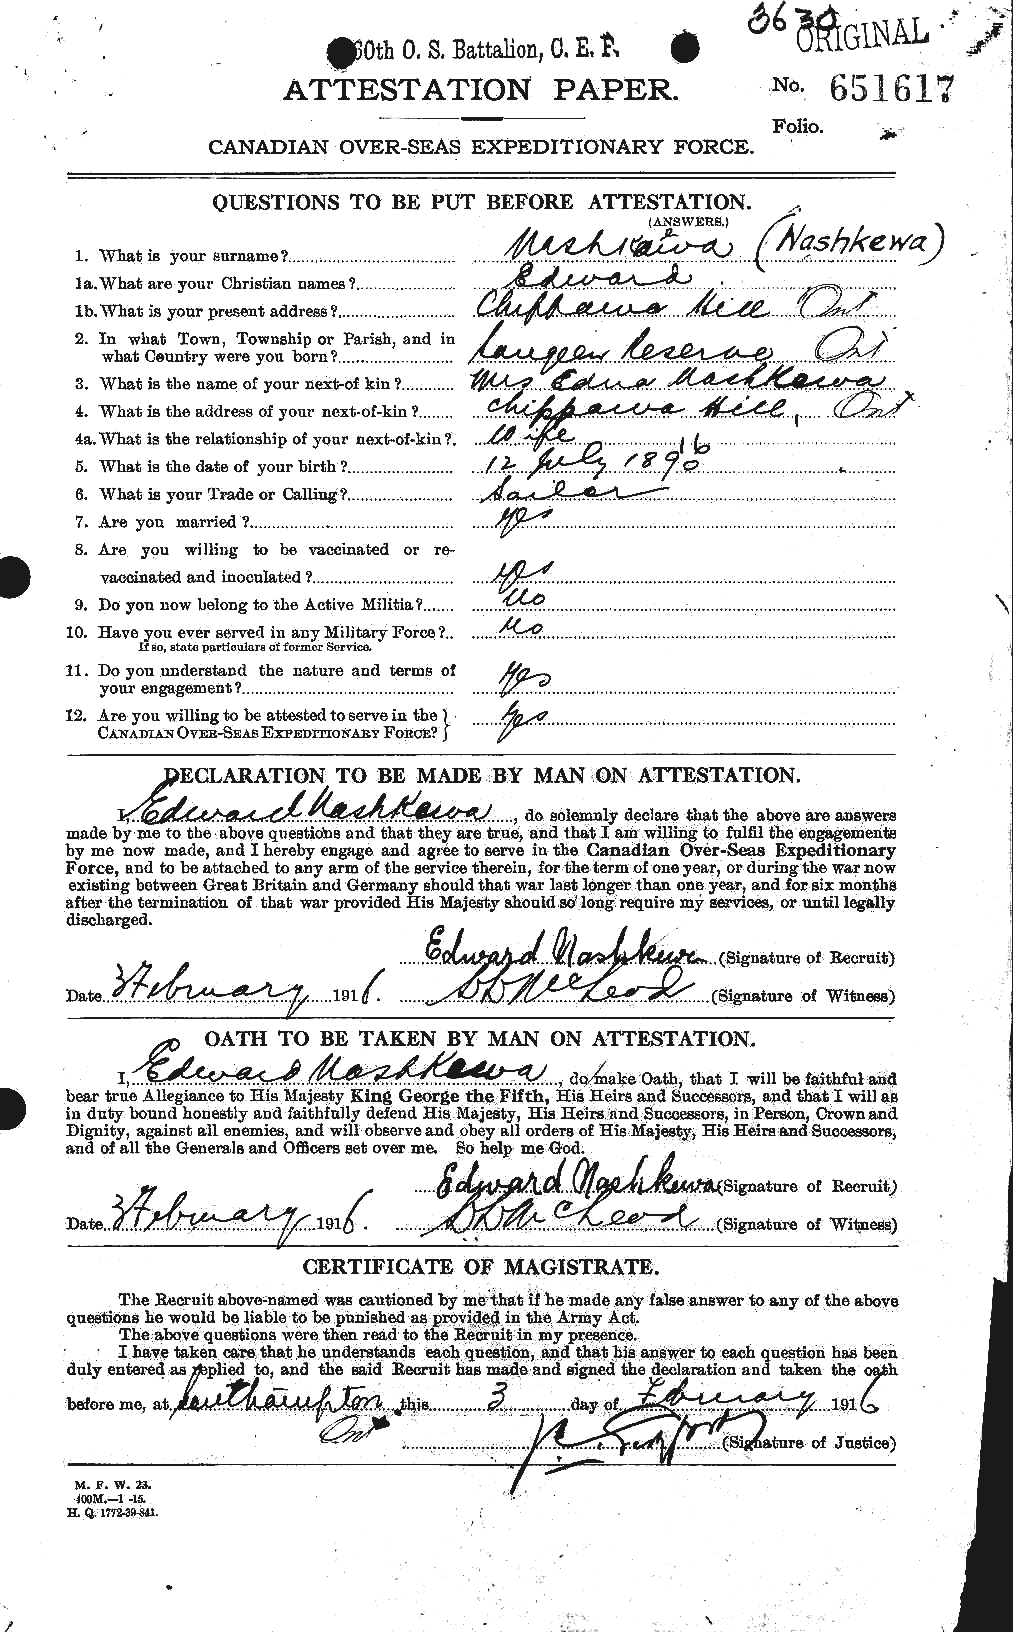 Personnel Records of the First World War - CEF 549074a